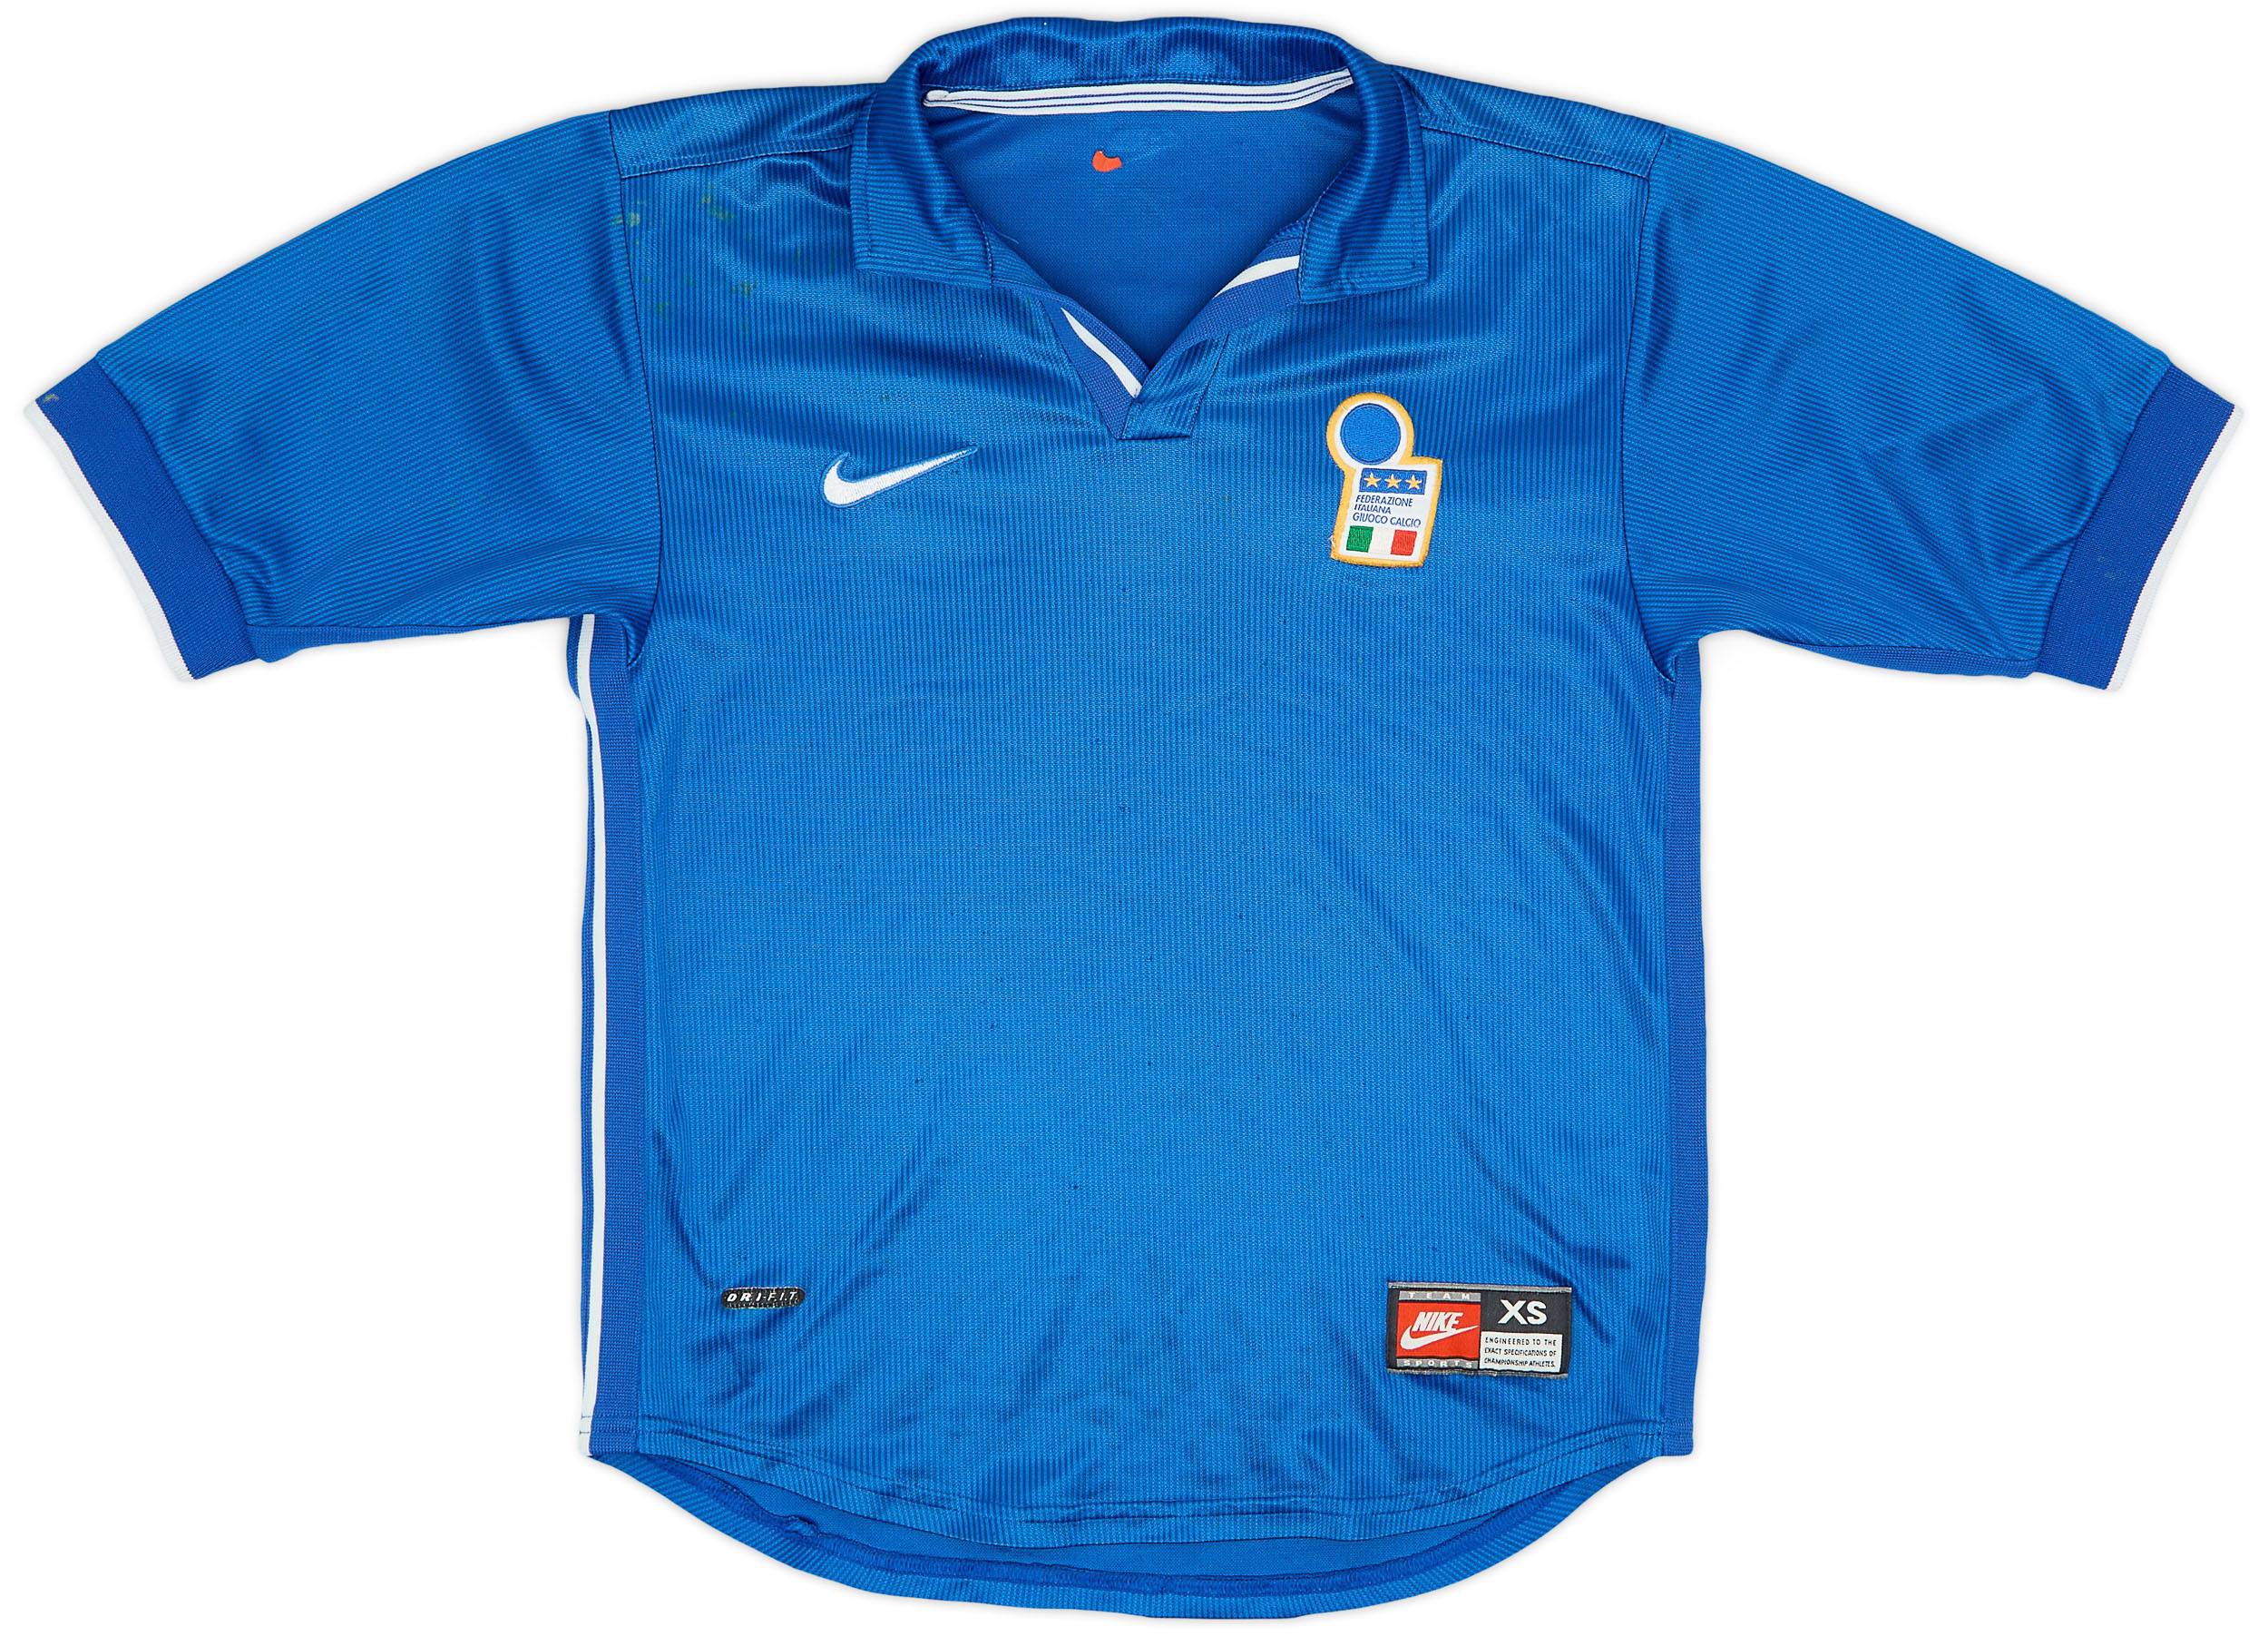 1997-98 Italy Home Shirt - 5/10 - (XS)